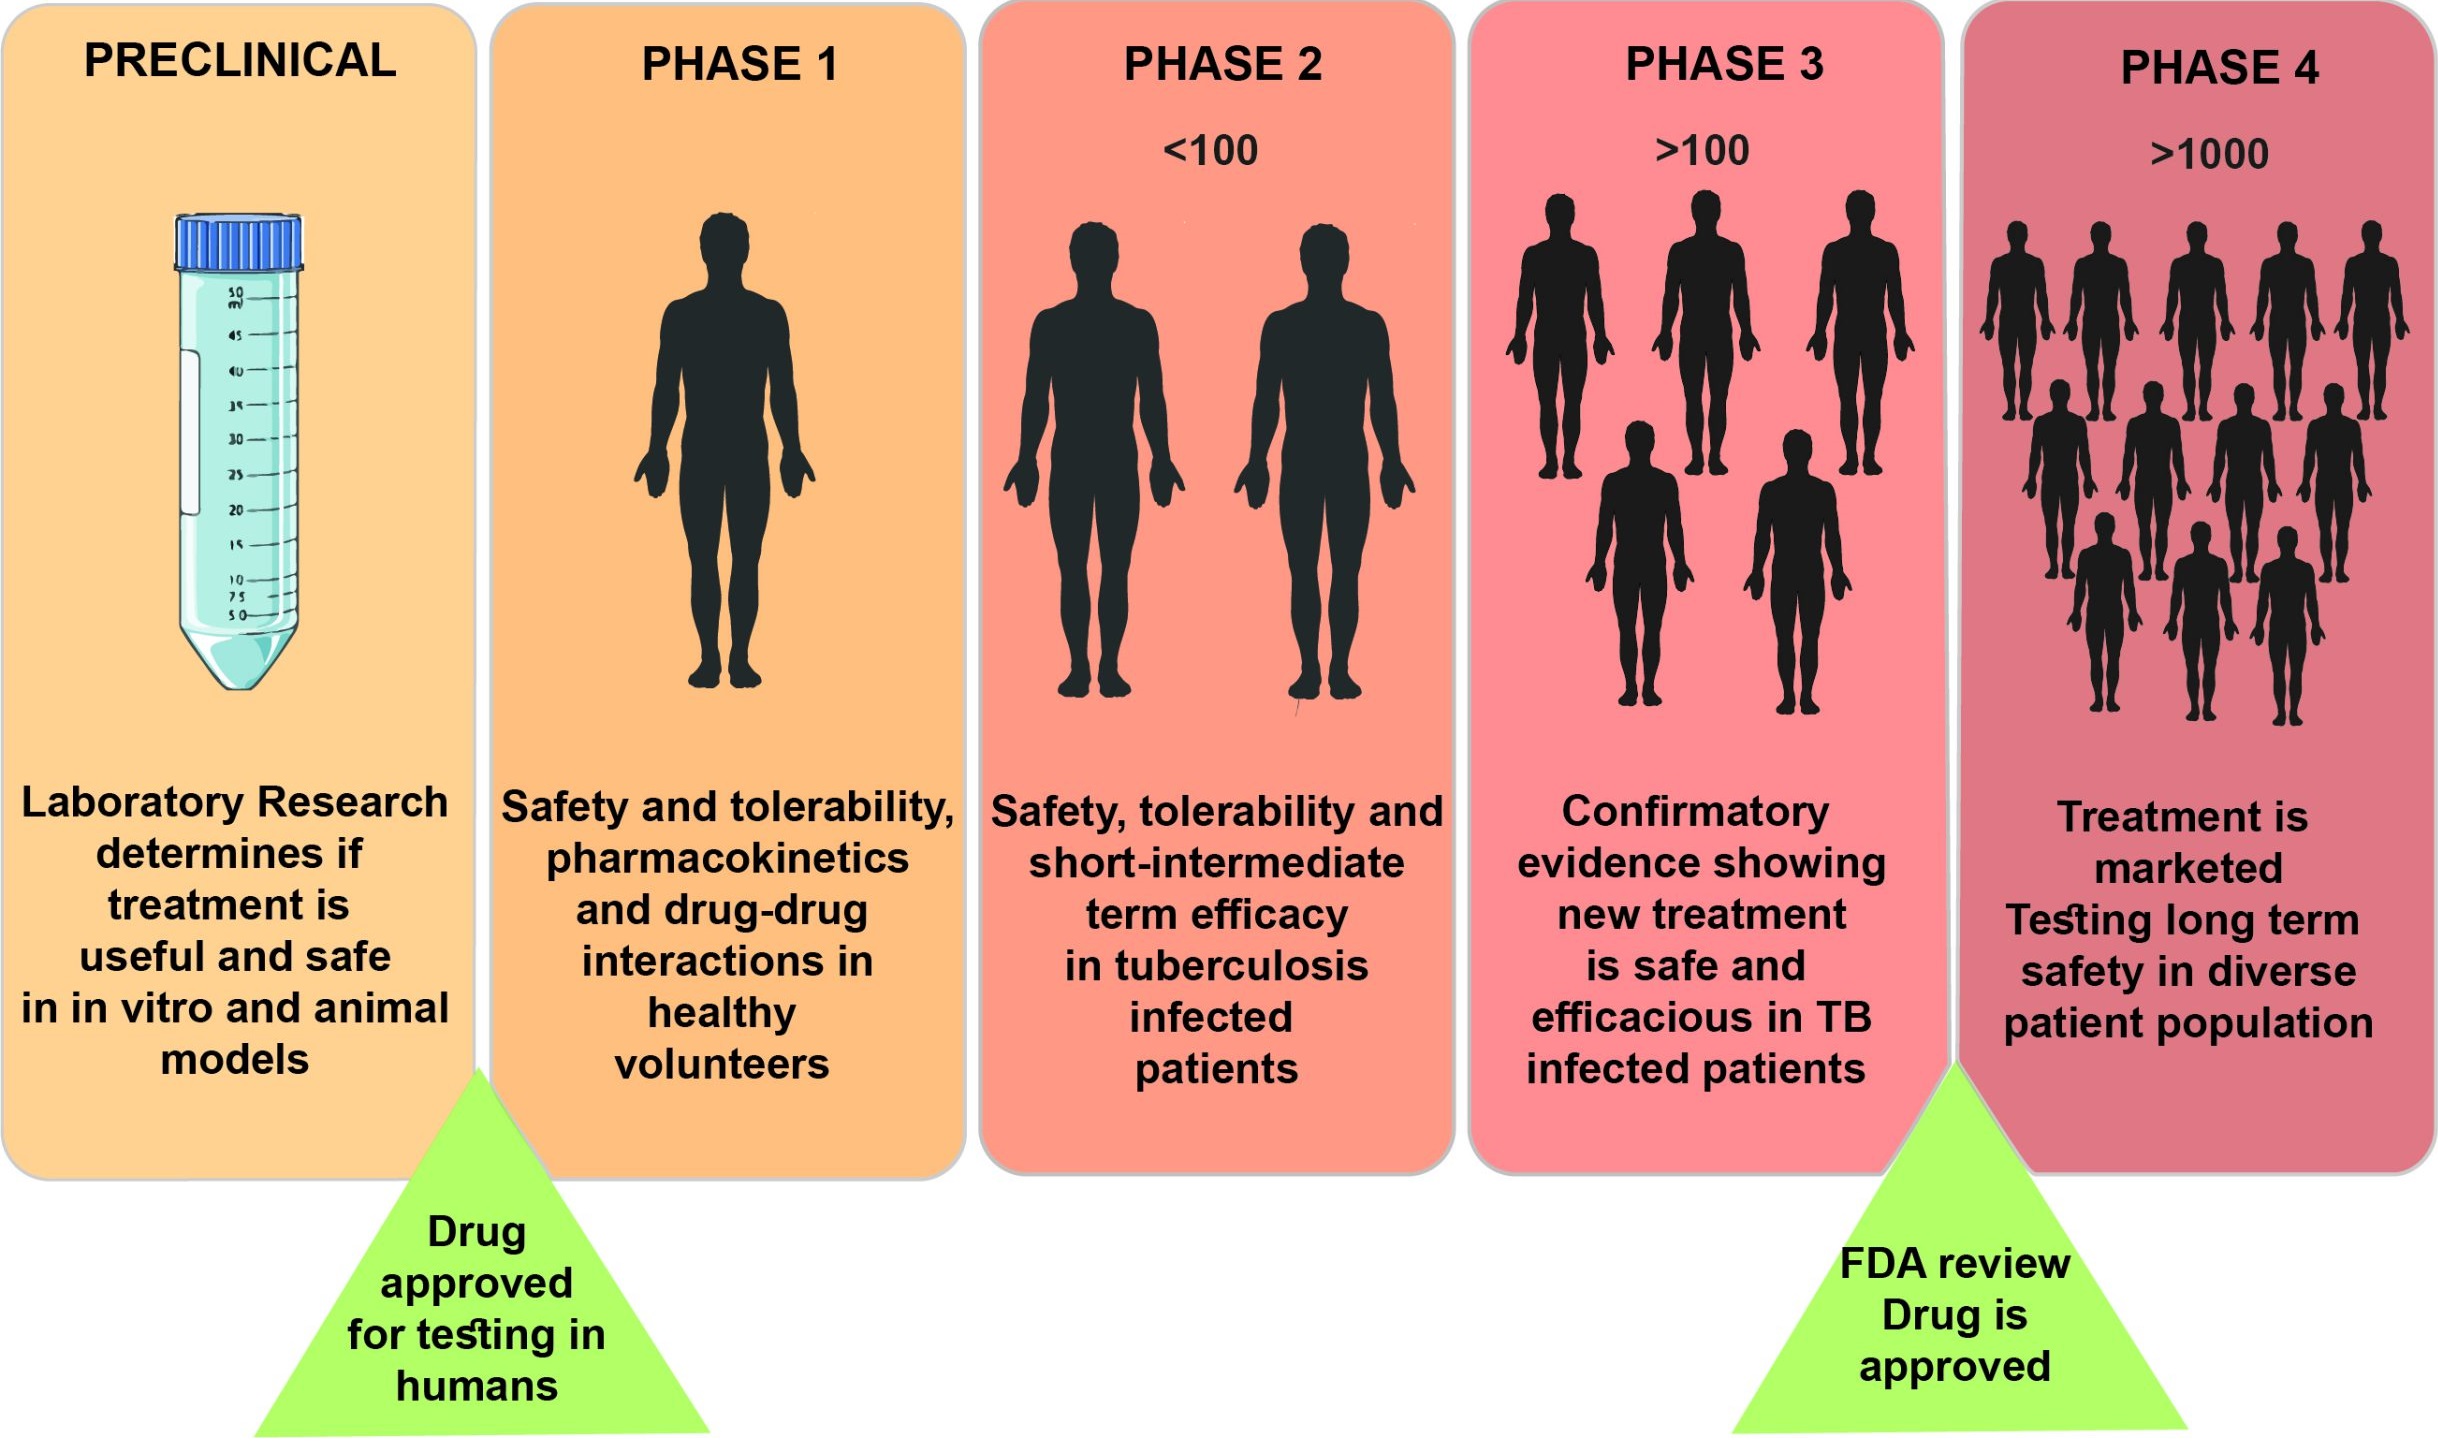 phases of clinical research trials